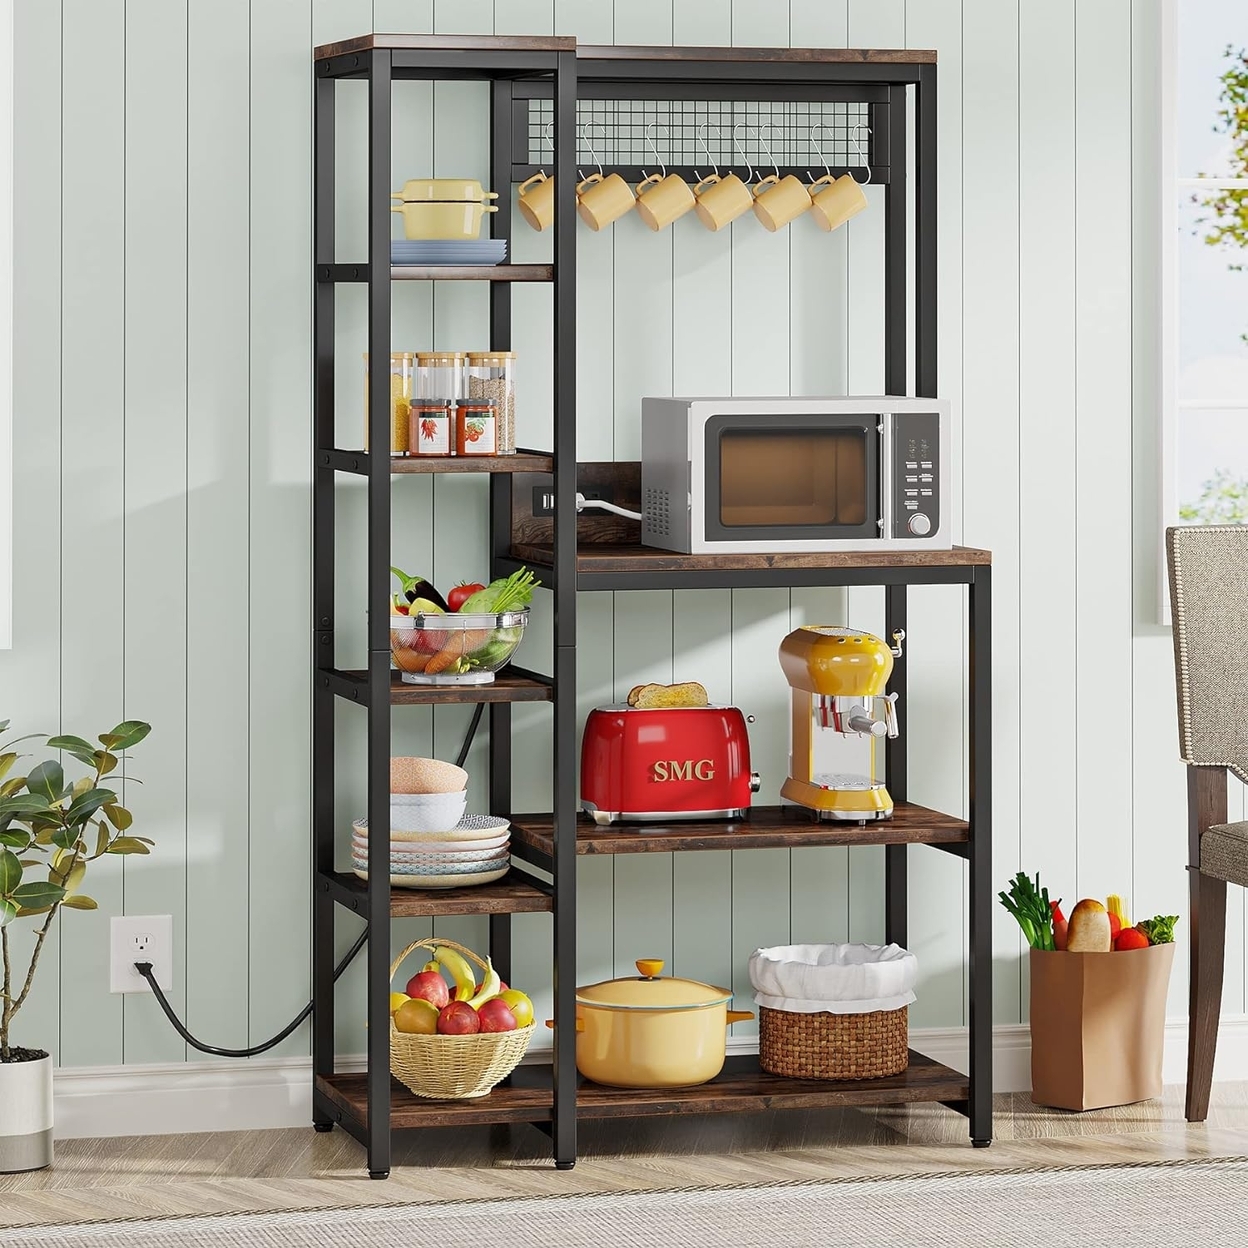 Tribesigns Baker's Rack With Power Outlets, 8-Tier Microwave Stand With Storage Shelves, Freestanding Kitchen Utility Shelf Organizer - Brow